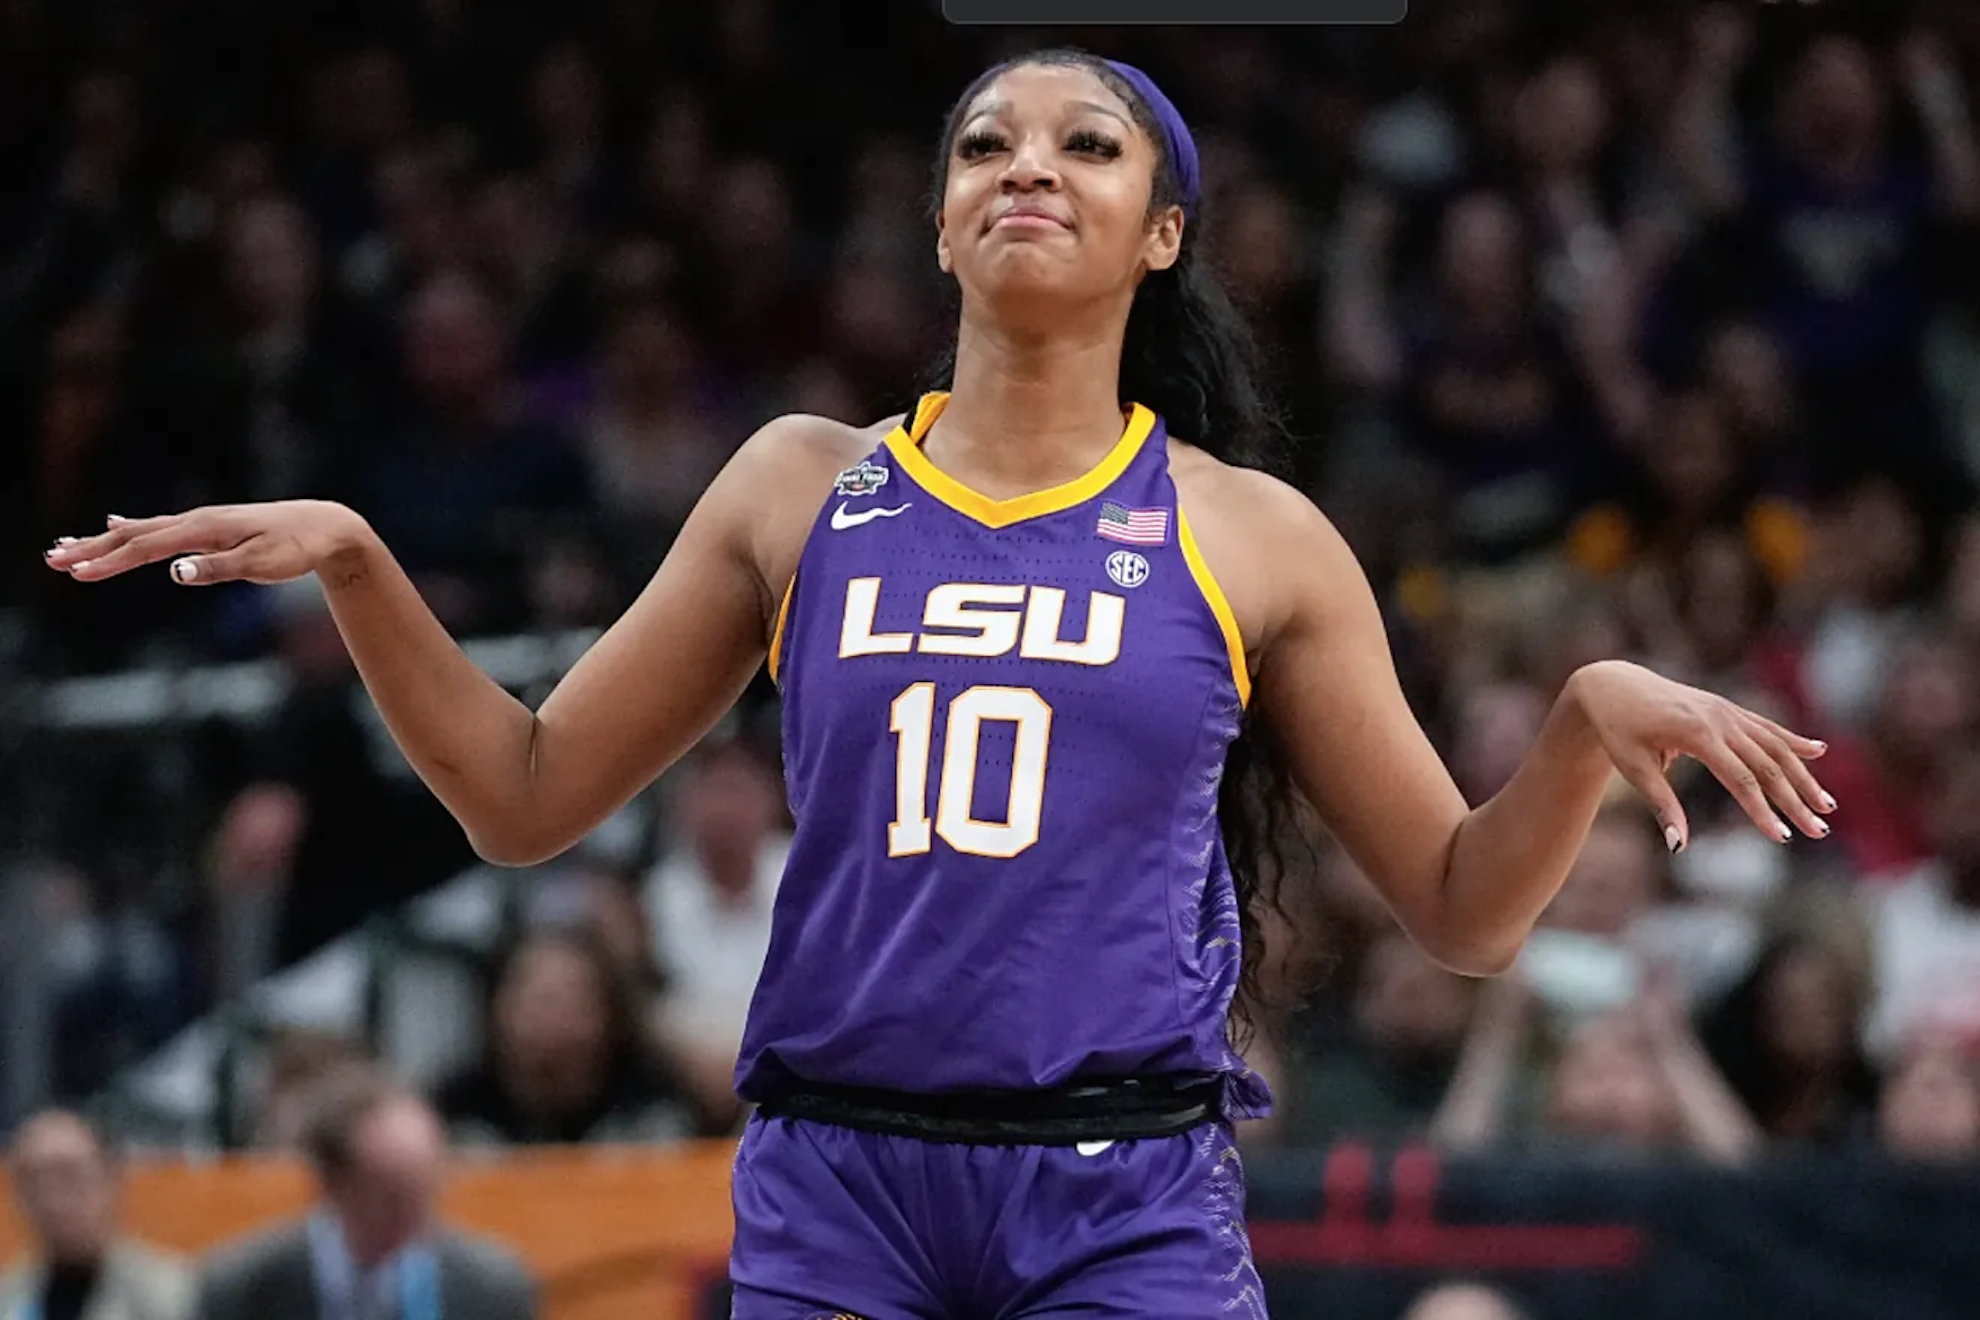 Angel Reese shows true colors with Hailey van Lith message after LSU transfer